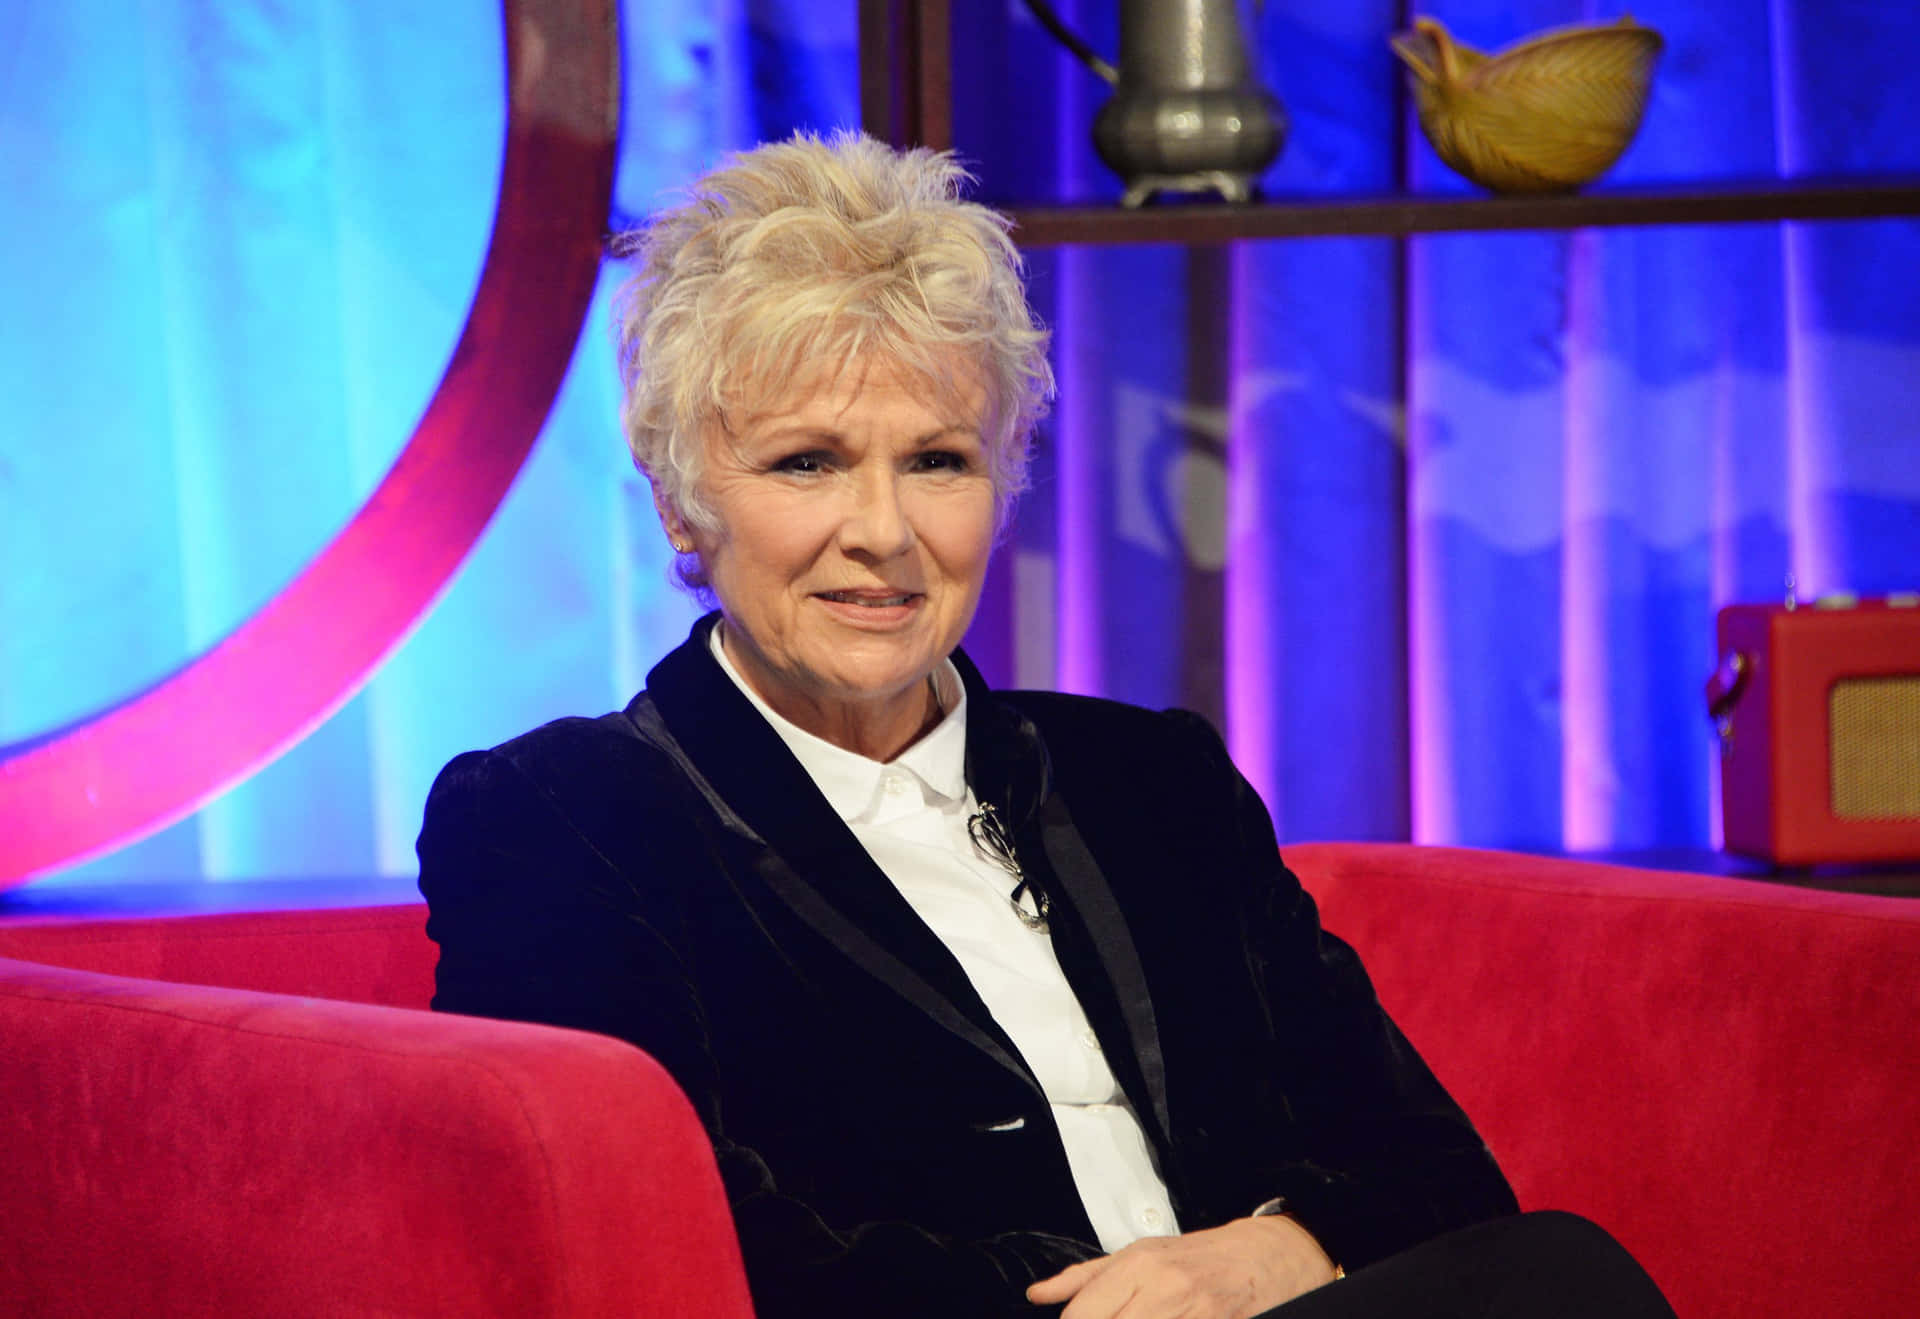 Julie Walters At A Red Carpet Event Wallpaper